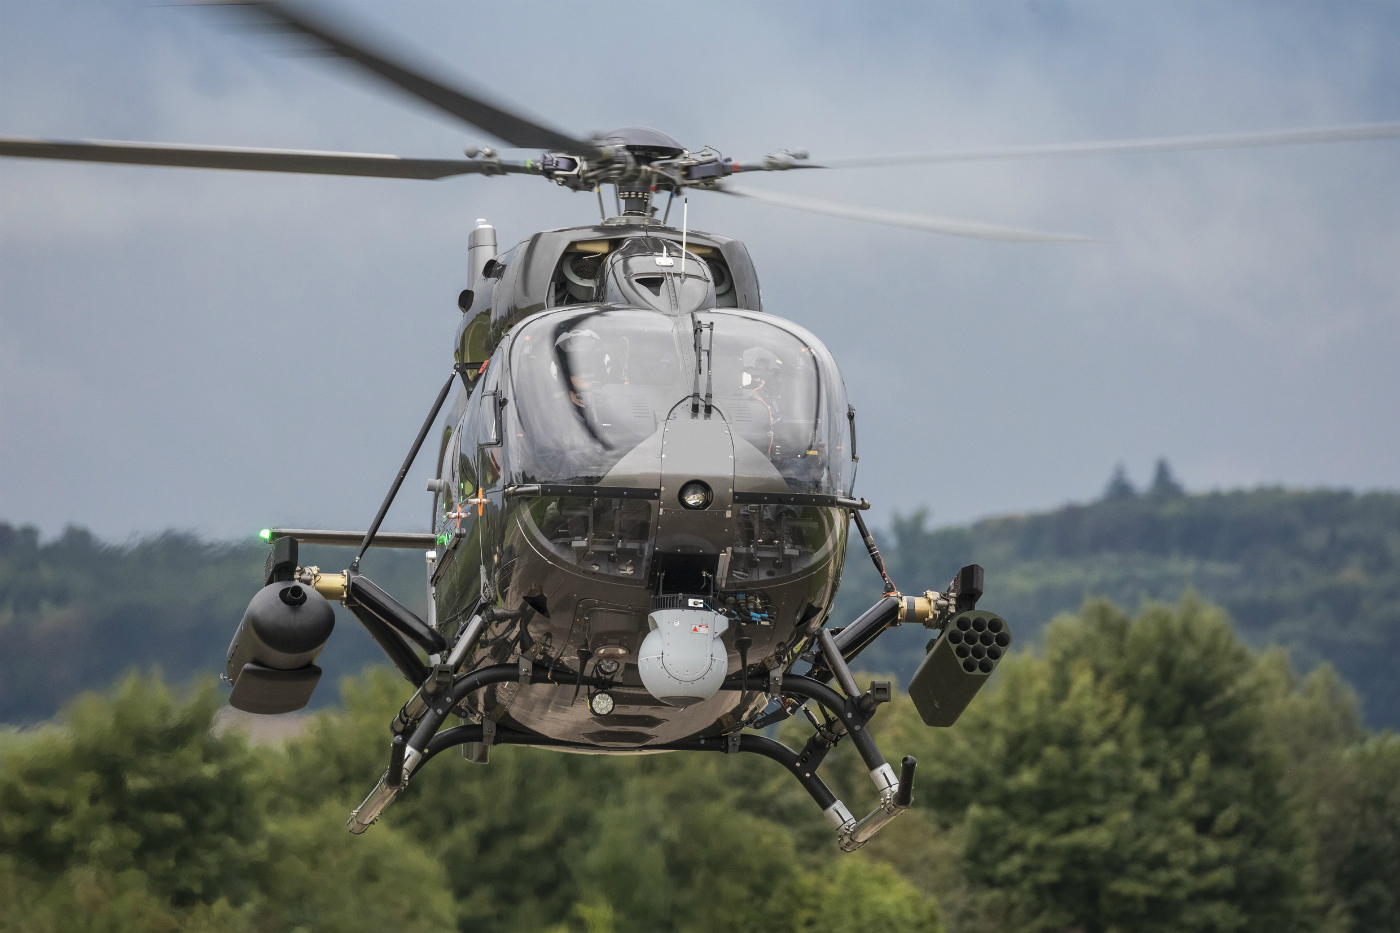 The Republic of Serbia is the launch customer for the H145M with the HForce weapon system. Christian Keller - Airbus Helicopters Photo